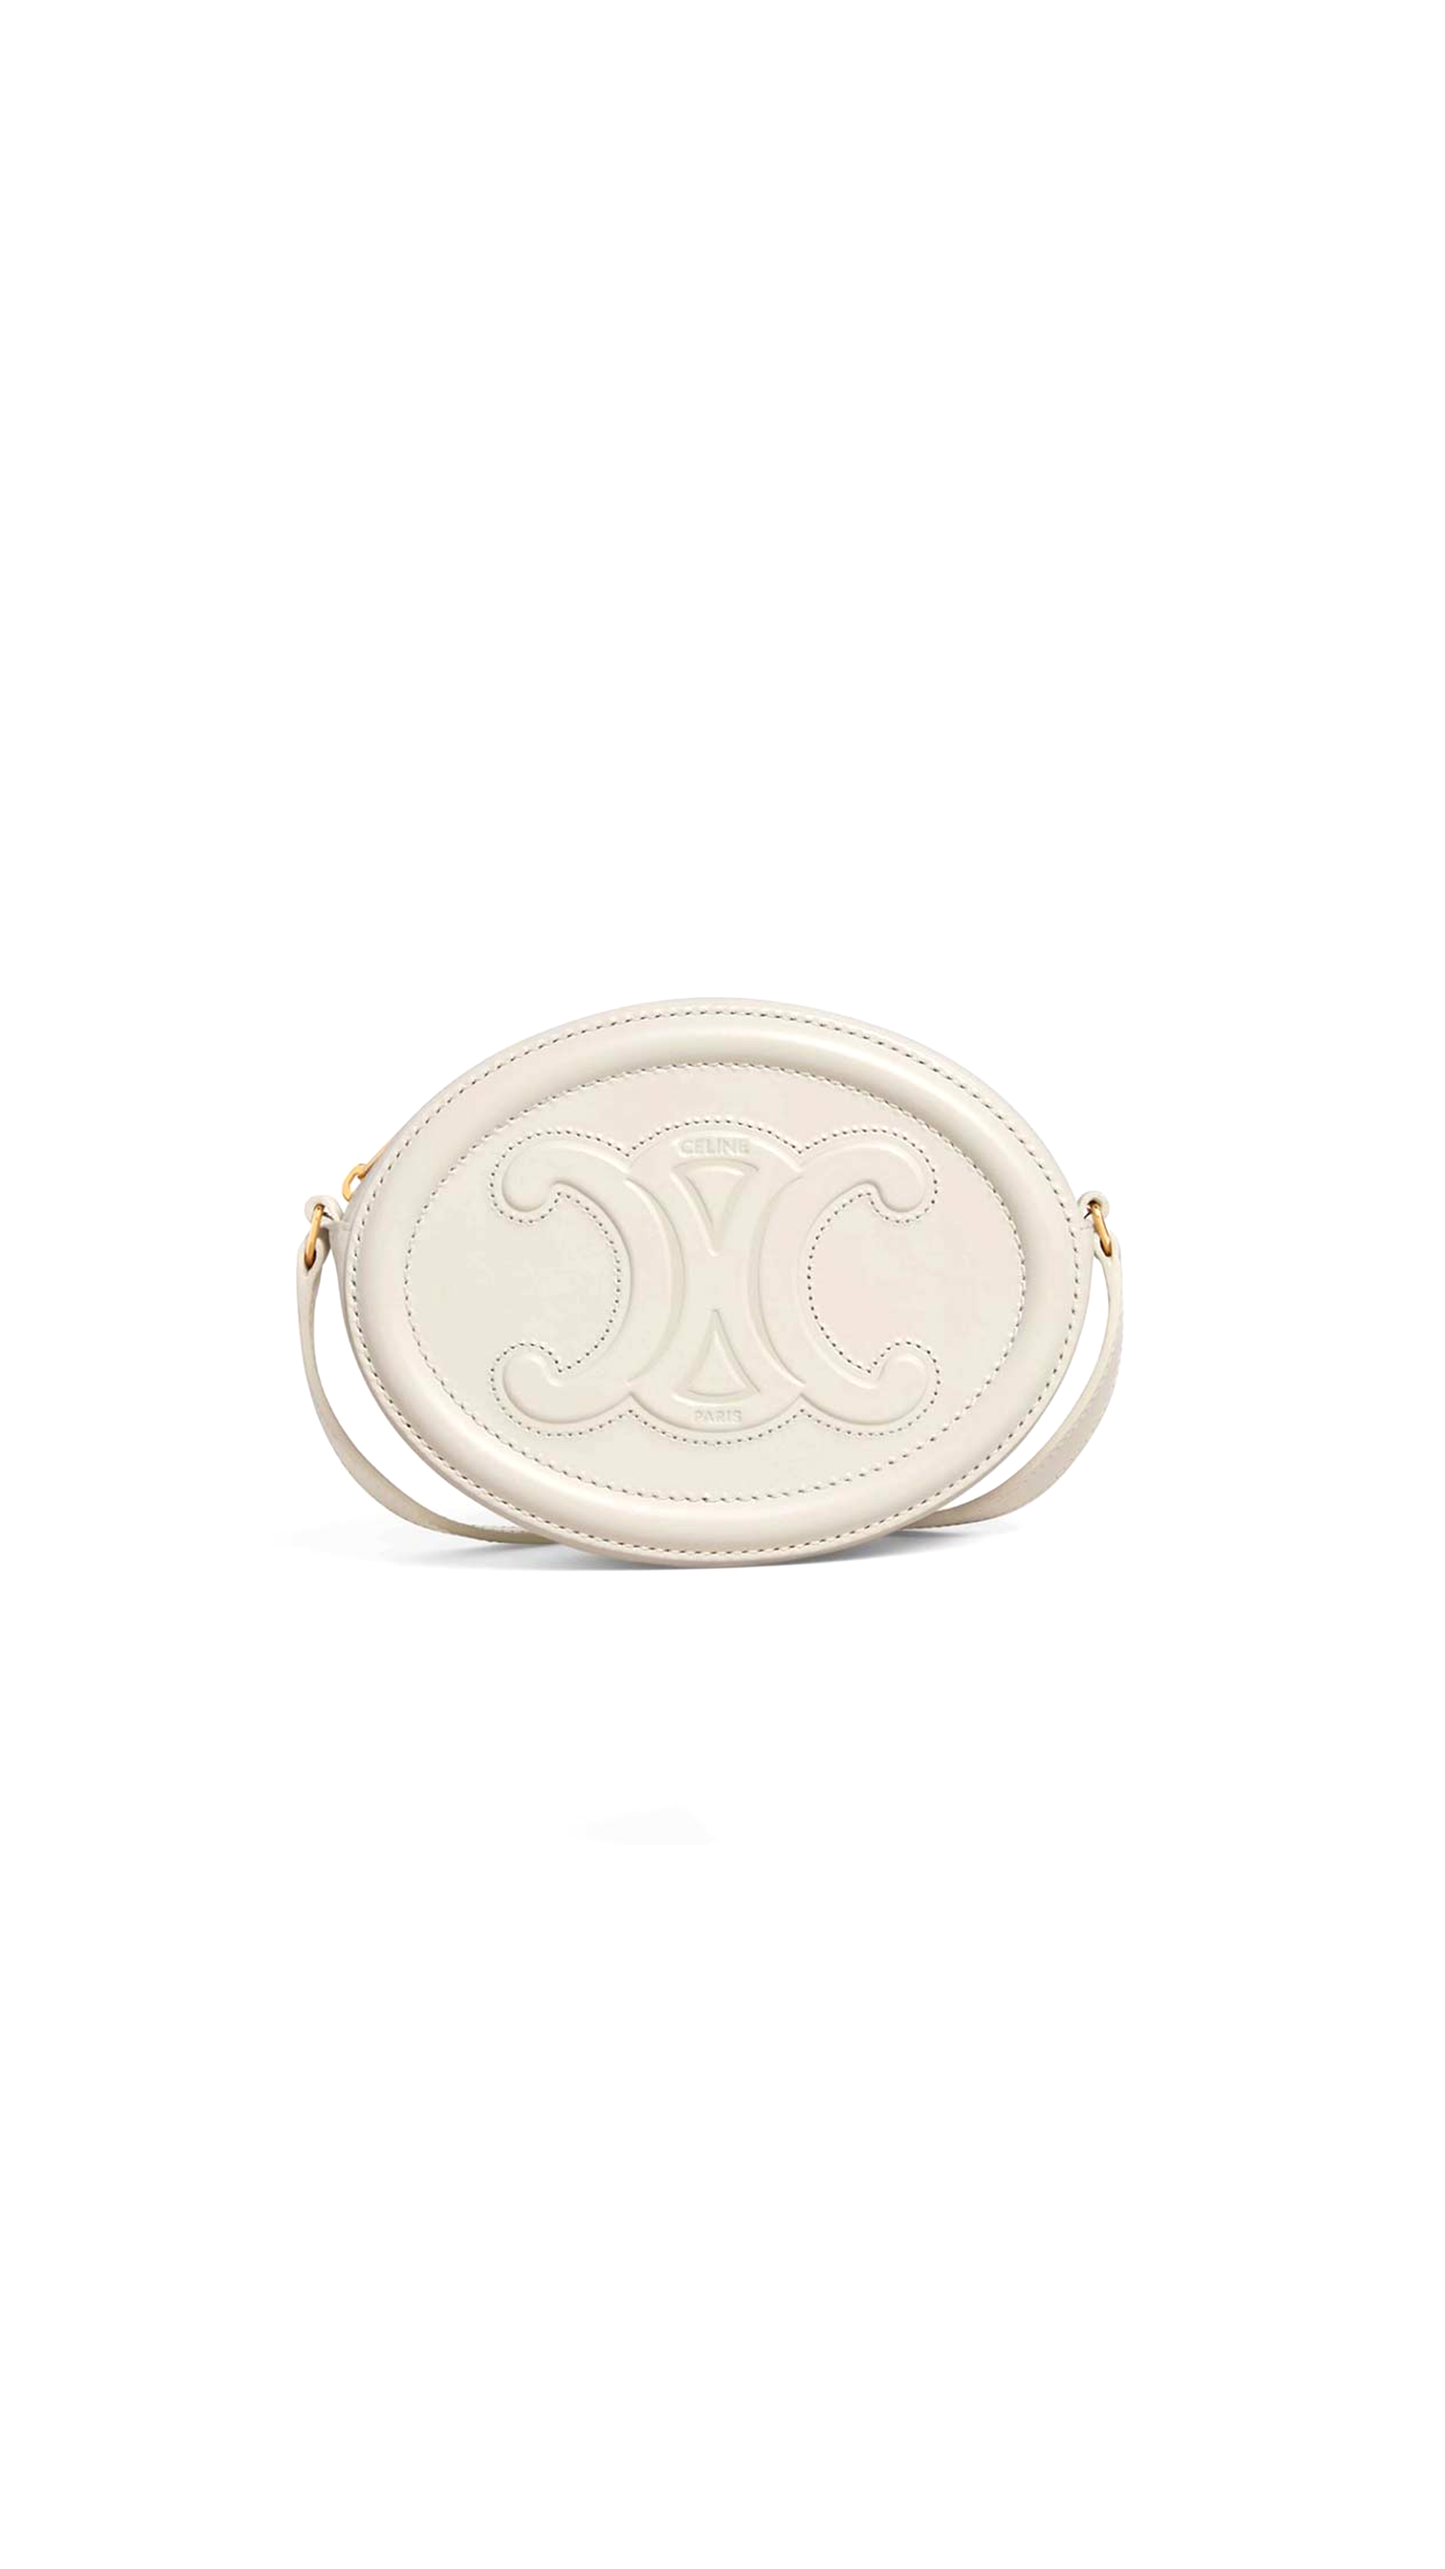 Crossbody Oval Purse Cuir Triomphe In Smooth Calfskin - White